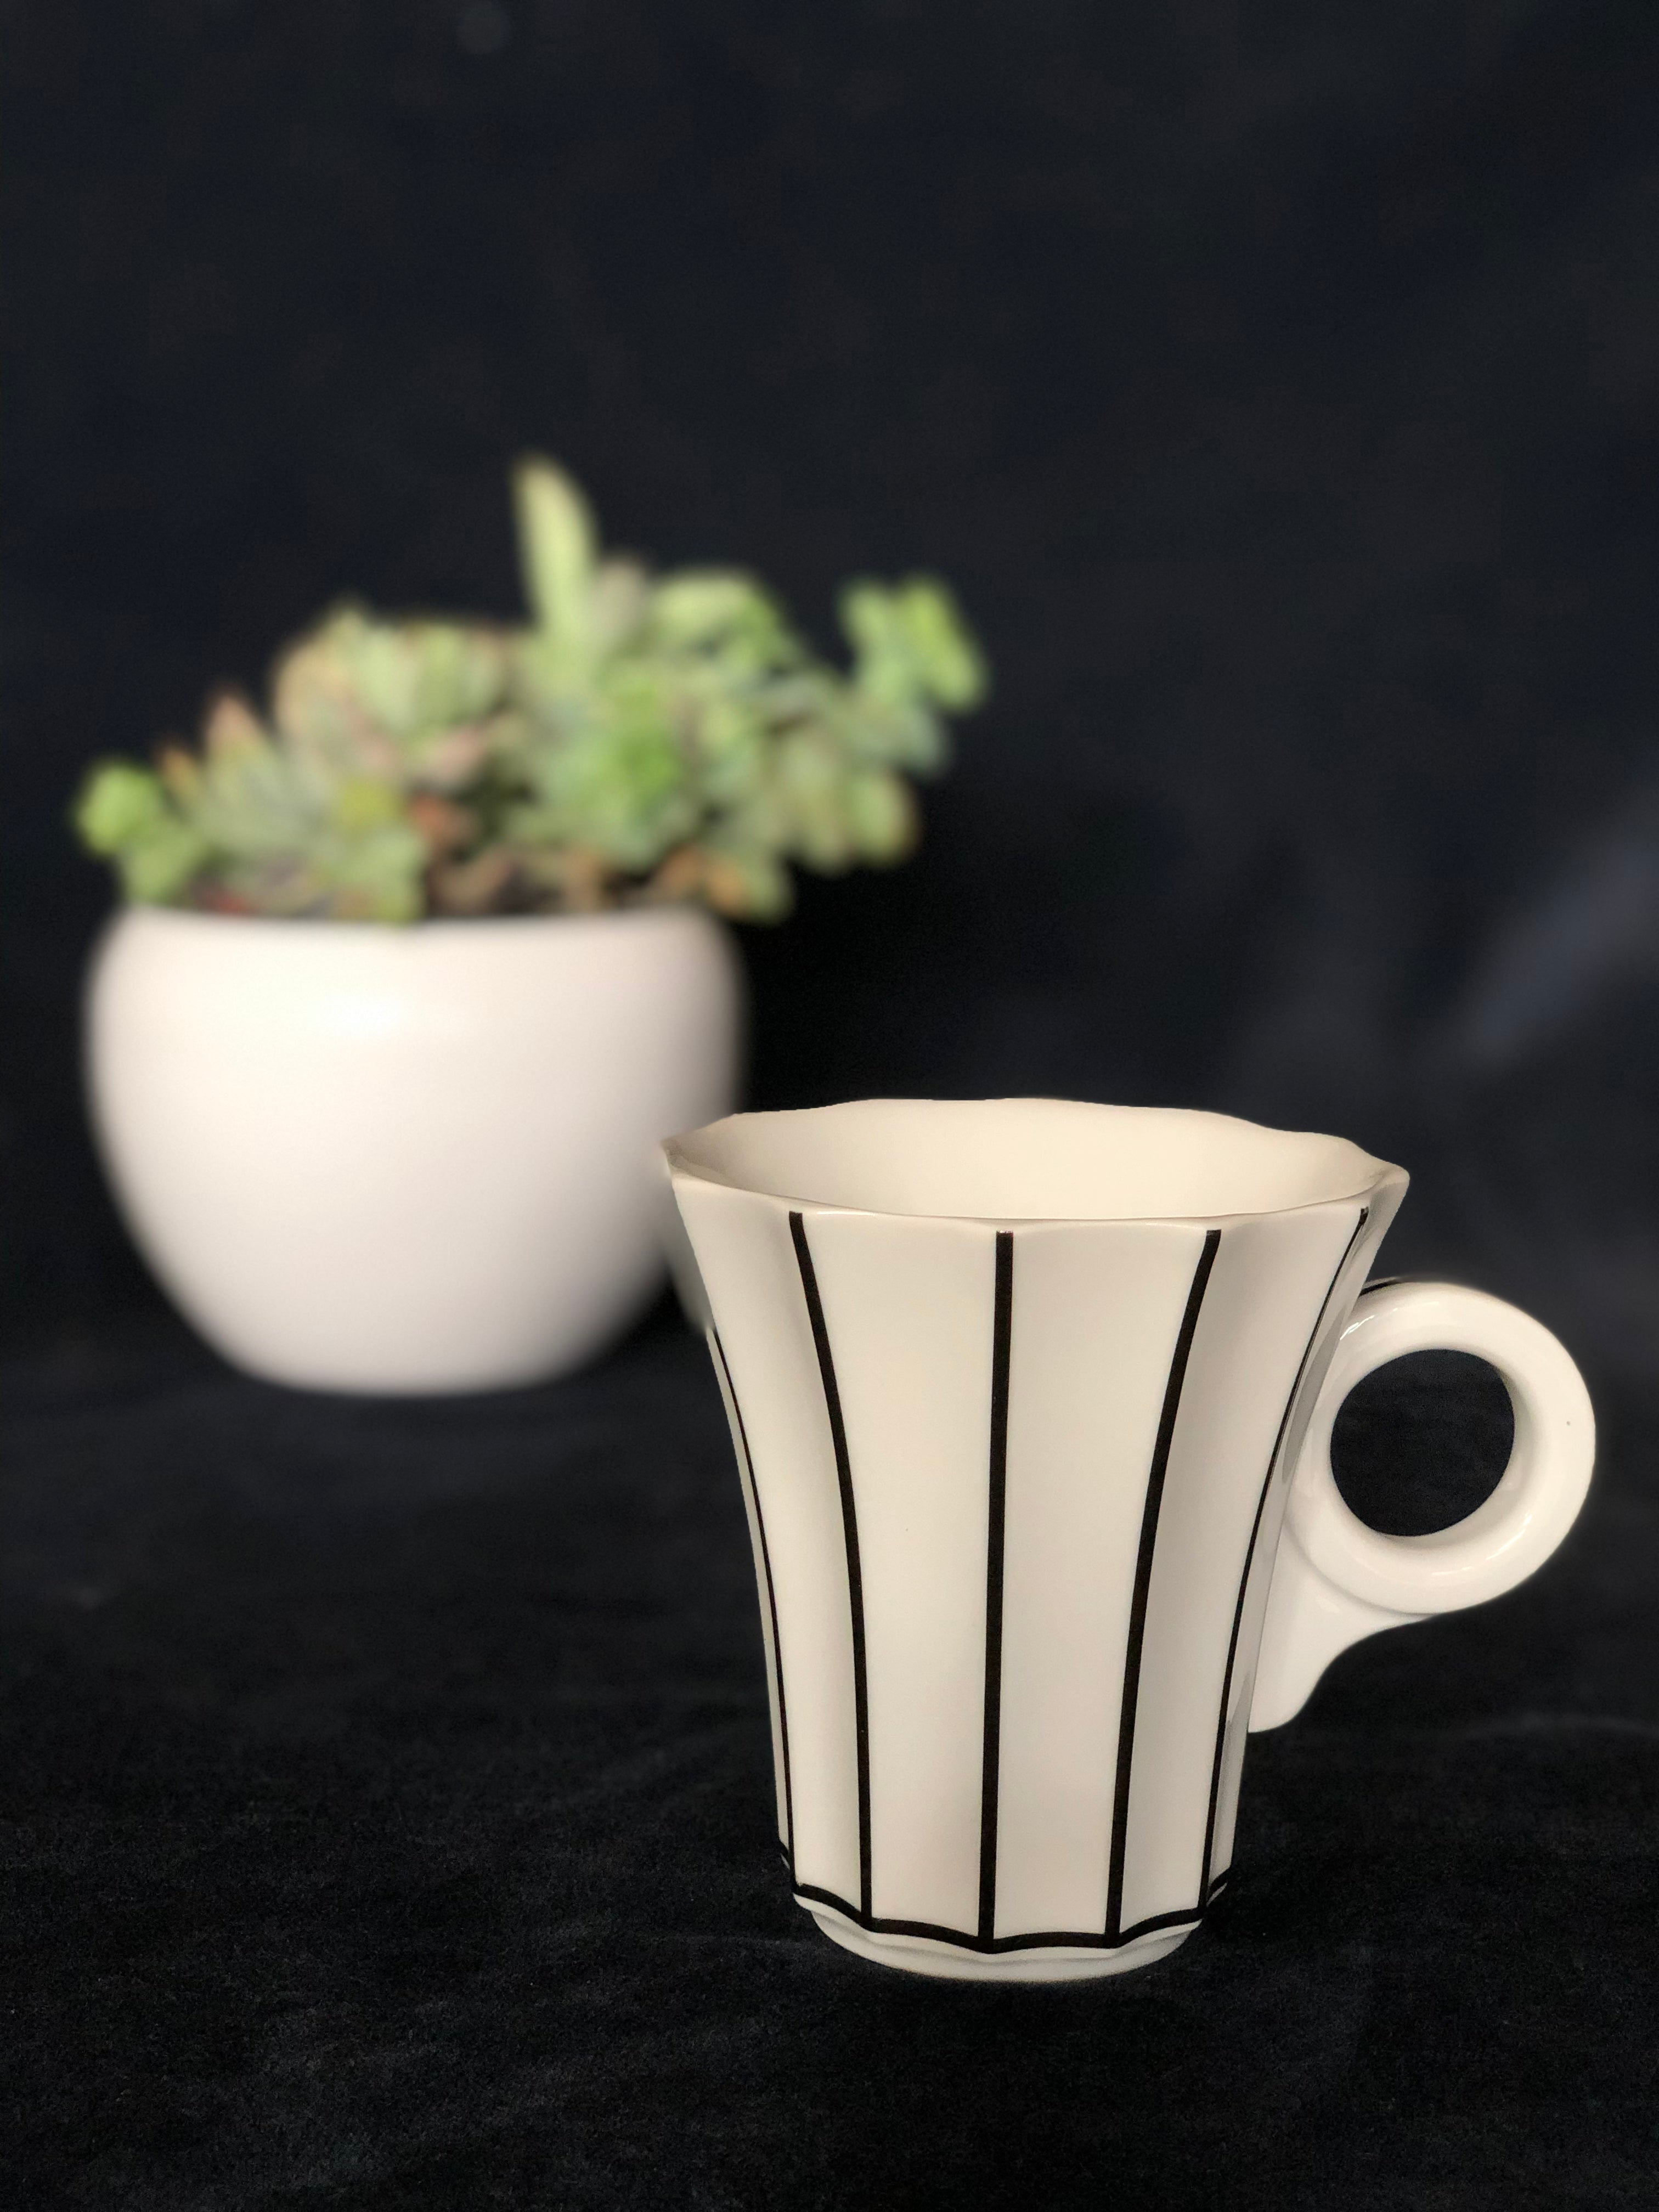 Art deco porcelain cup for decoration and kitchen use